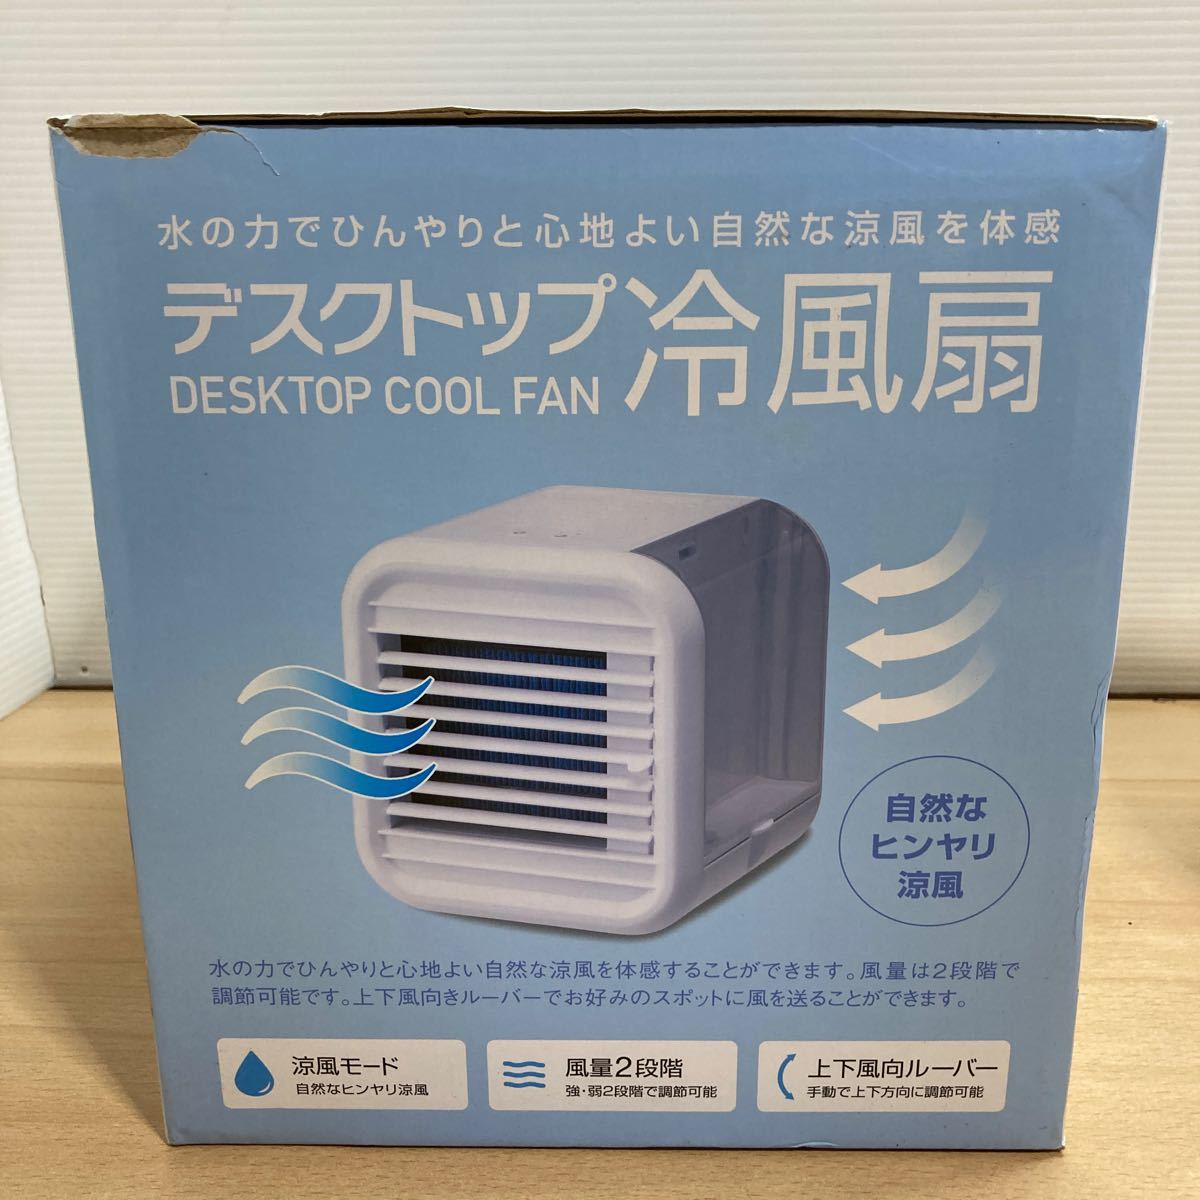 1 jpy start cold manner machine cold air fan desk top personal cooler,air conditioner RF-T1813 spot cooler desk electric fan small size electric fan unused storage goods (3-4)